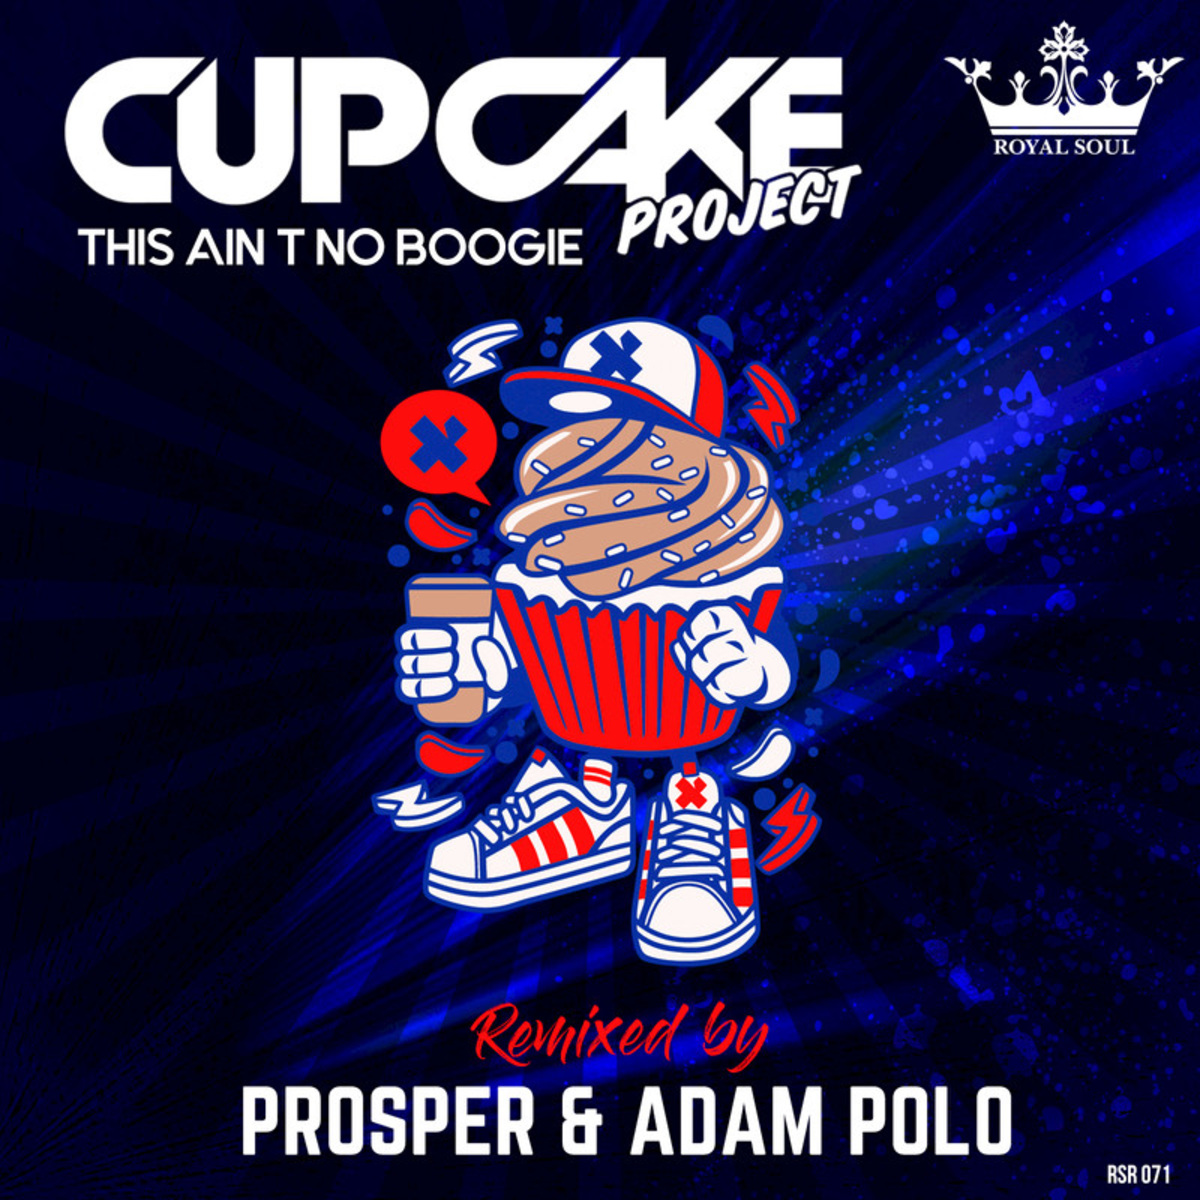 Cupcake Project - This Ain't No Boogie (Prosper & Adam Polo Remix) / Royal Soul Records